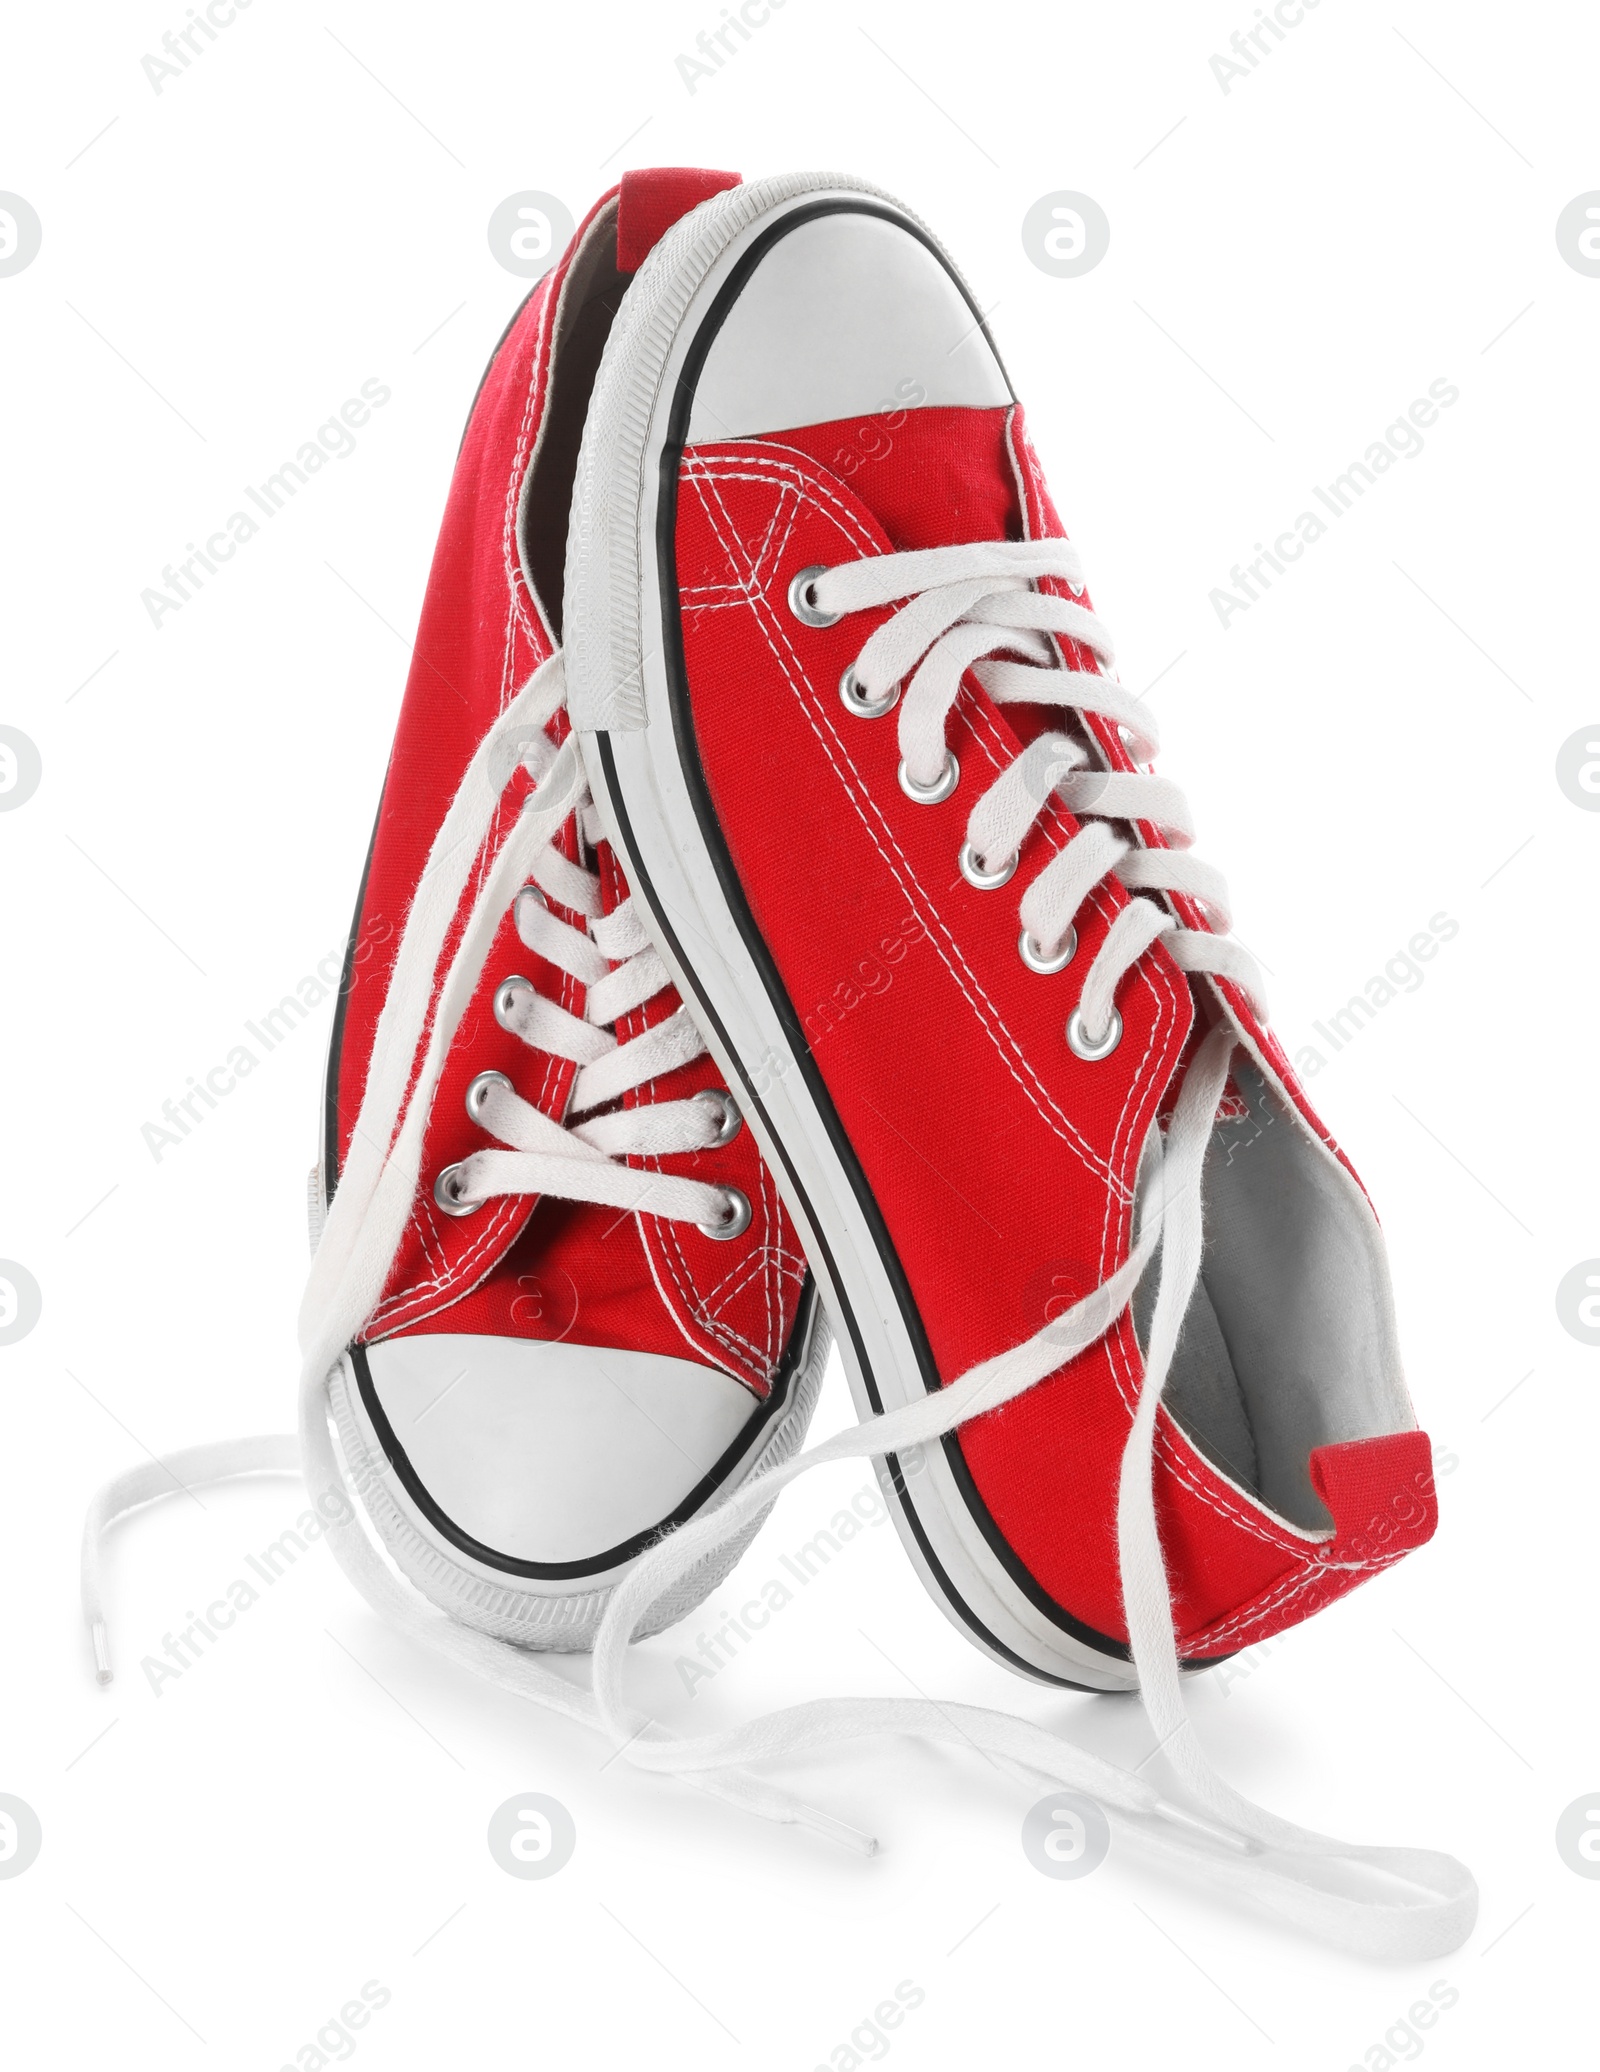 Photo of Stylish red canvas shoes with laces on white background